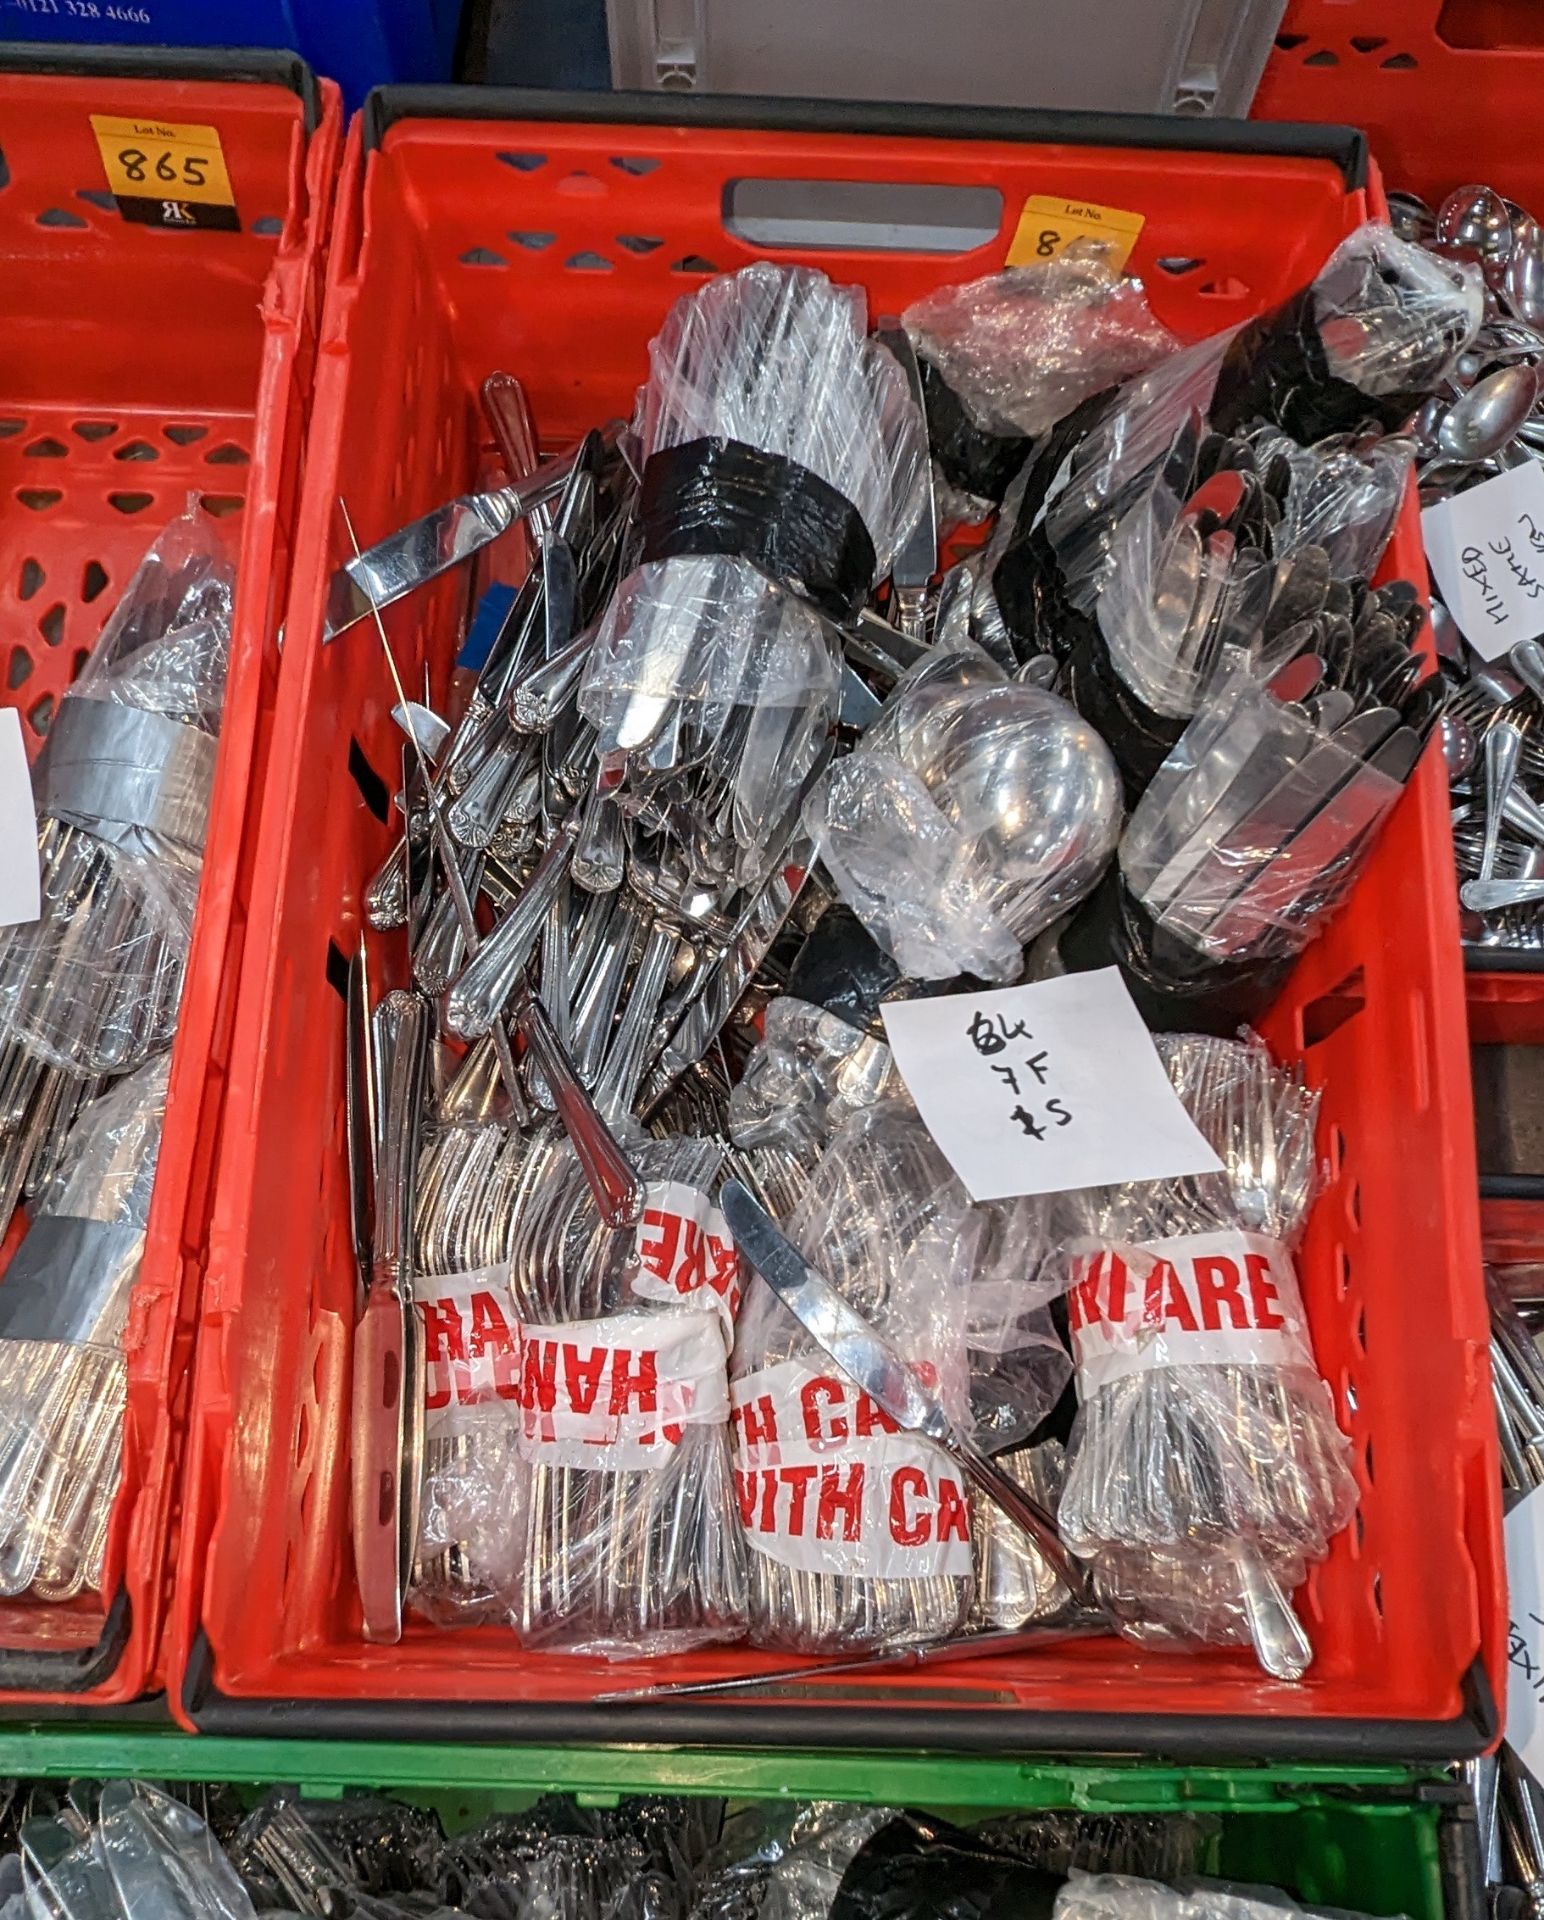 The contents of a crate of cutlery. Approximately 700 pieces, made up of 14 bags each with 50 piece